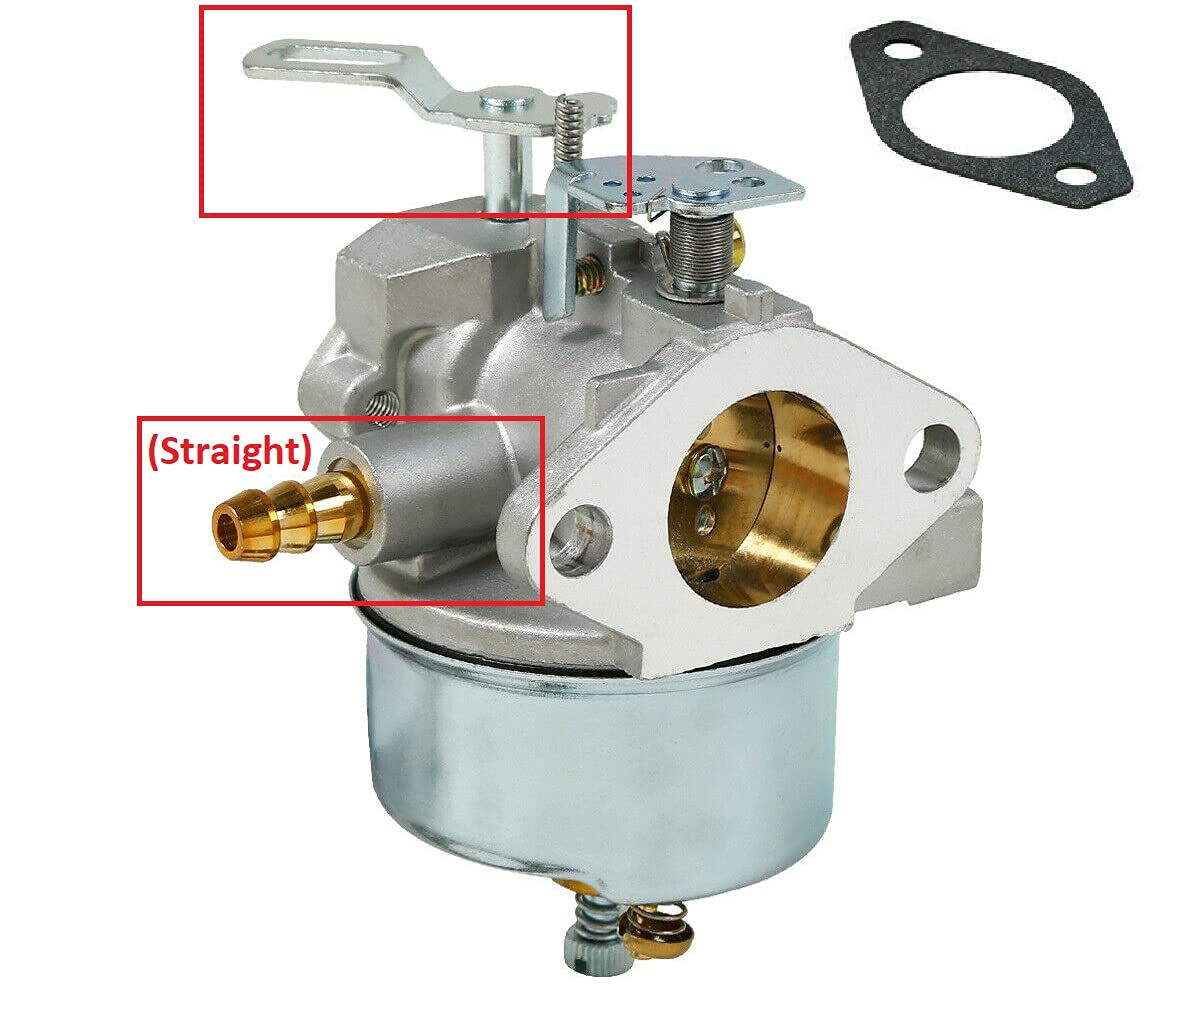 Owigift Carburetor Carb Replaces for John Deere Snowblower TRS22 TRS24 TRS26 TRS27 TRS32 TRX24 TRX26 TRX27 TRX32 Walk Behind Snow Blower Thrower with Tecumseh 8Hp Engine